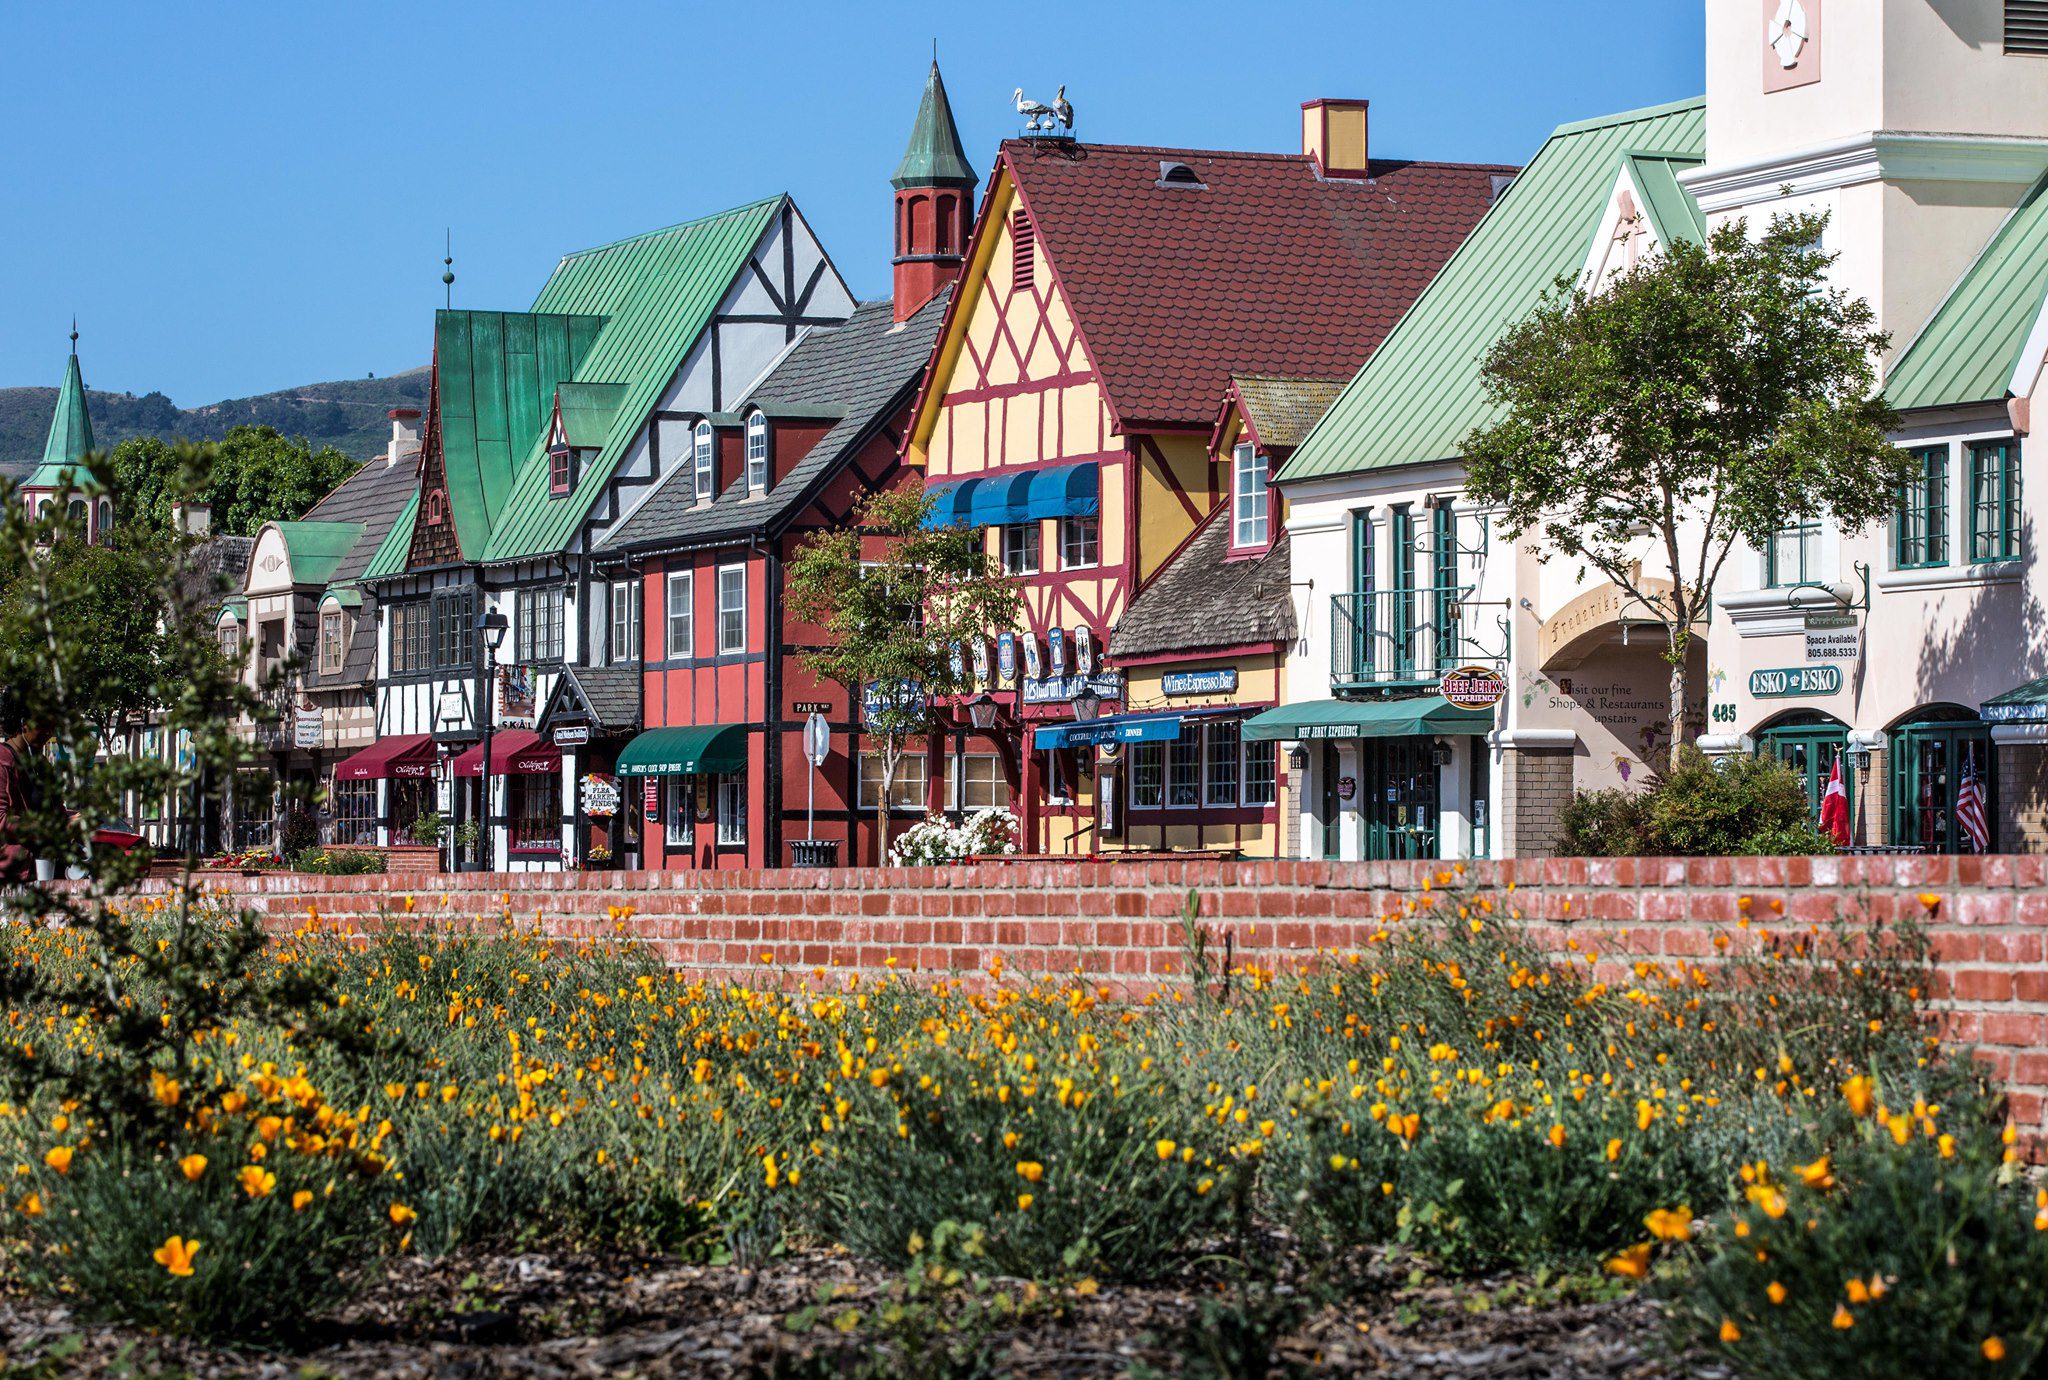 2020 Census shows biggest growth in Solvang for SB County